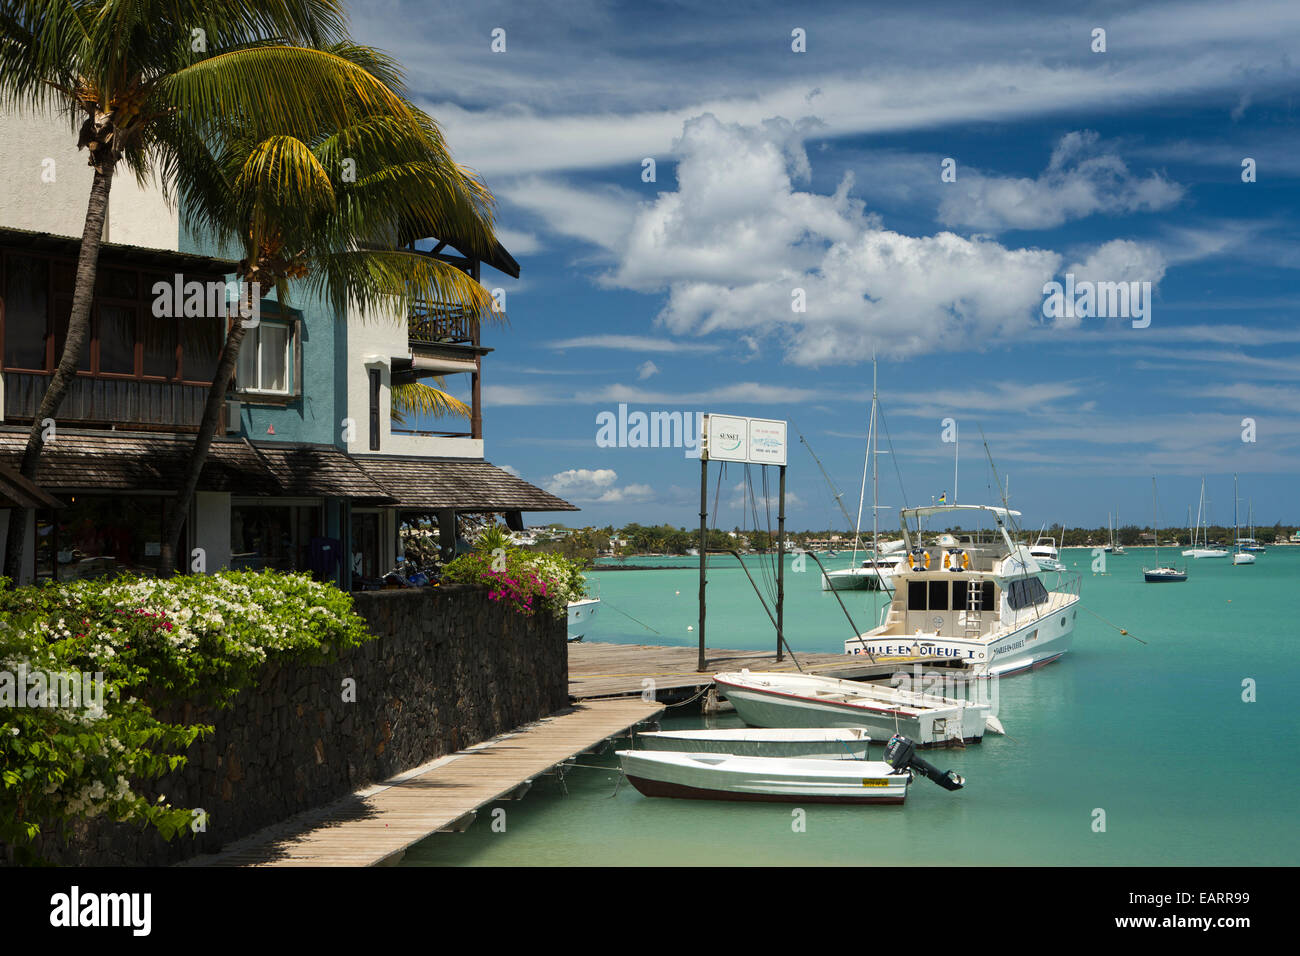 Mauritius, Grand Baie, public beach, fishing boats moored at jetty Stock Photo